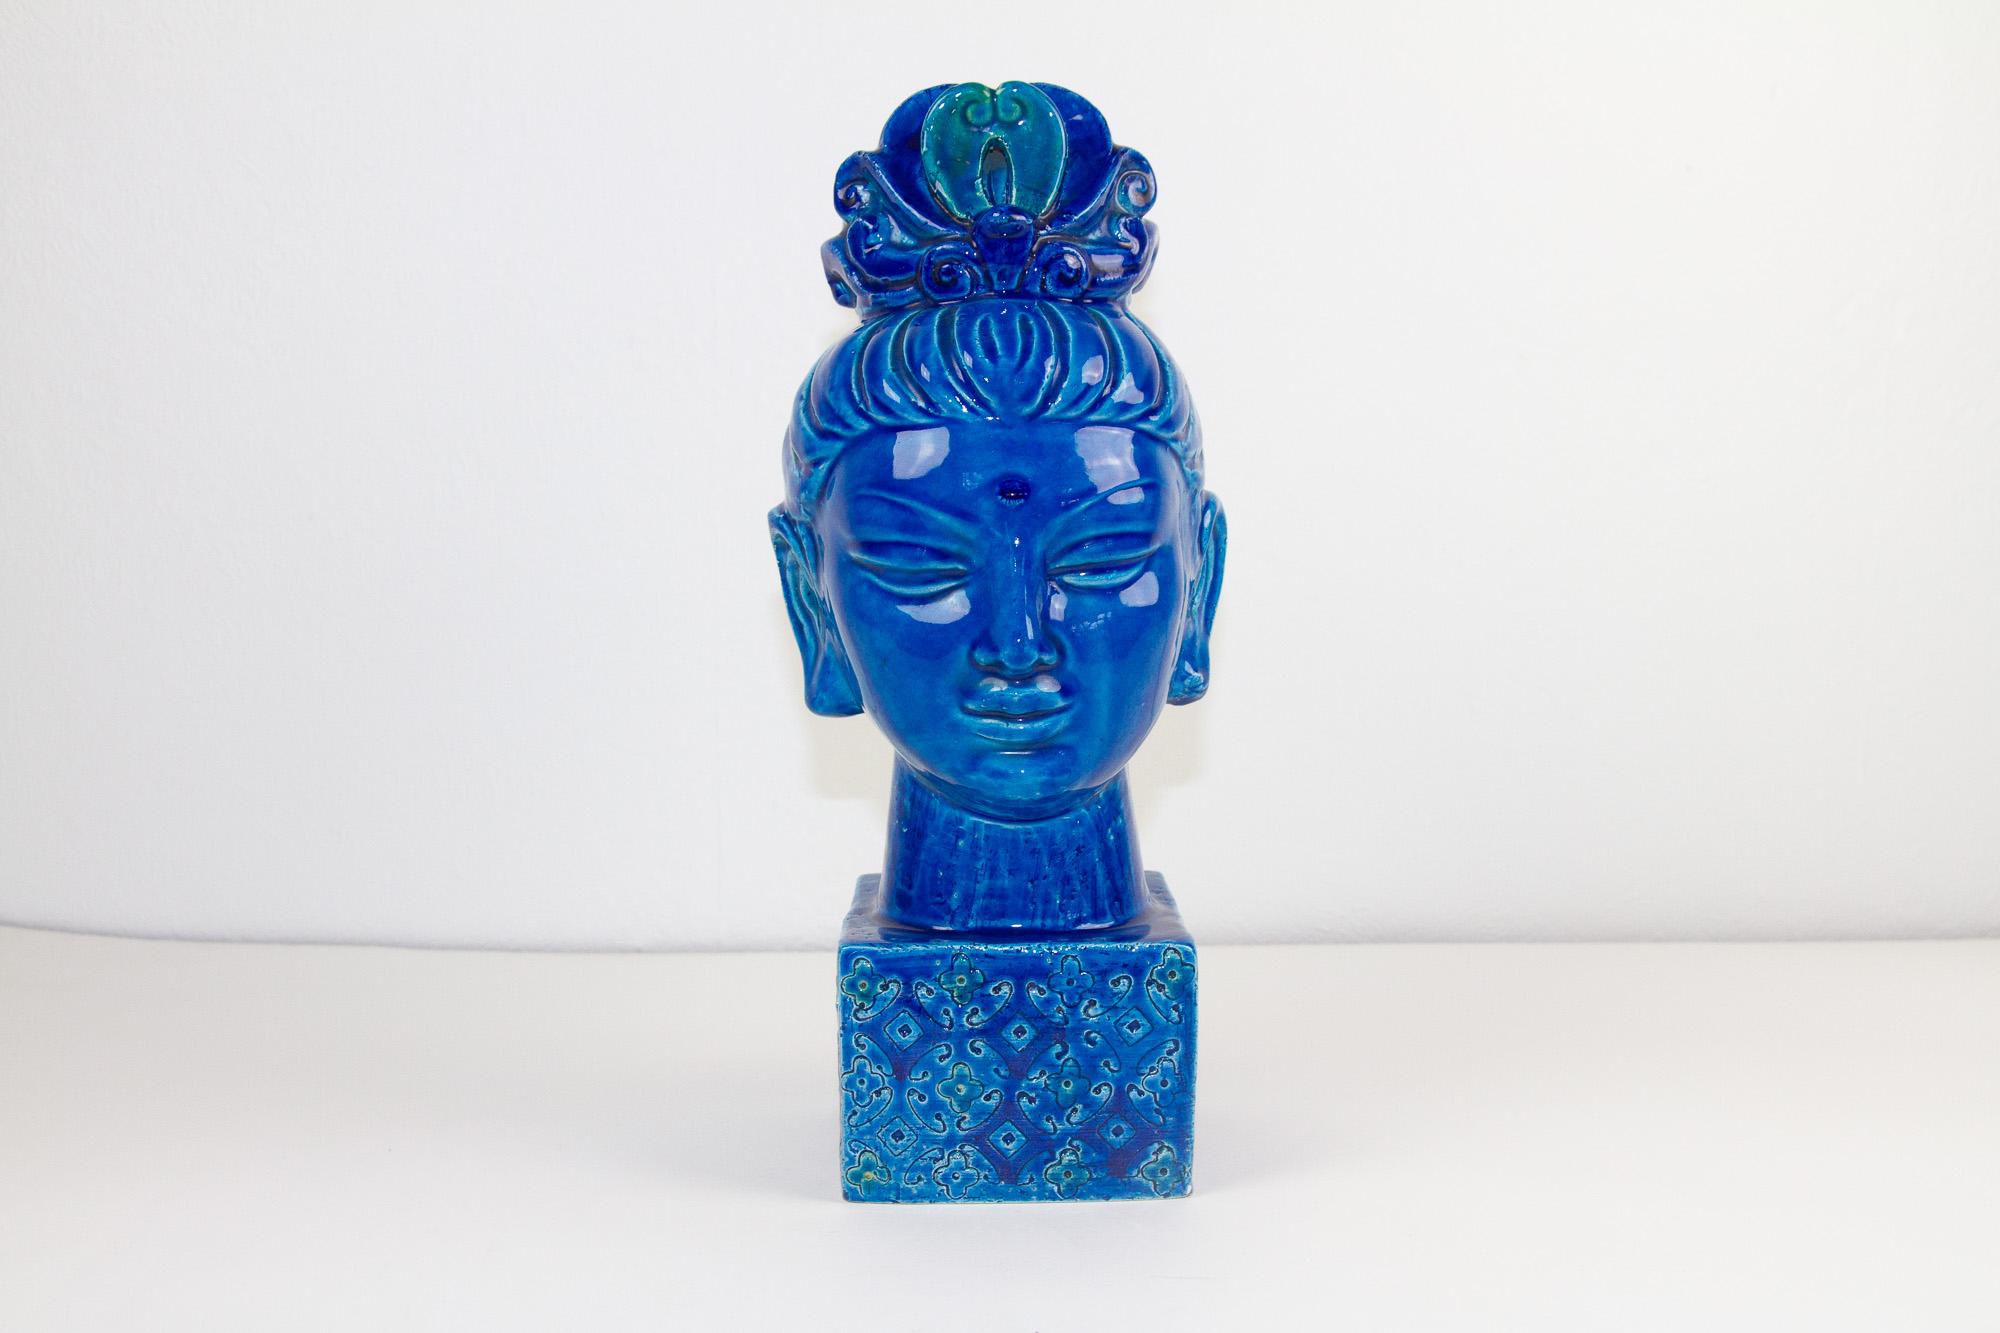 Vintage Italian Kwan Yin Figurine byt Aldo Londi for Bitossi, 1960s
Aldo Londi for Bitossi Buddha head on plinth in blue glaze ceramic with hints of green. This female Buddha Kwan Yin / Gua Nyin sculpture from the 1960s was often bought to bring